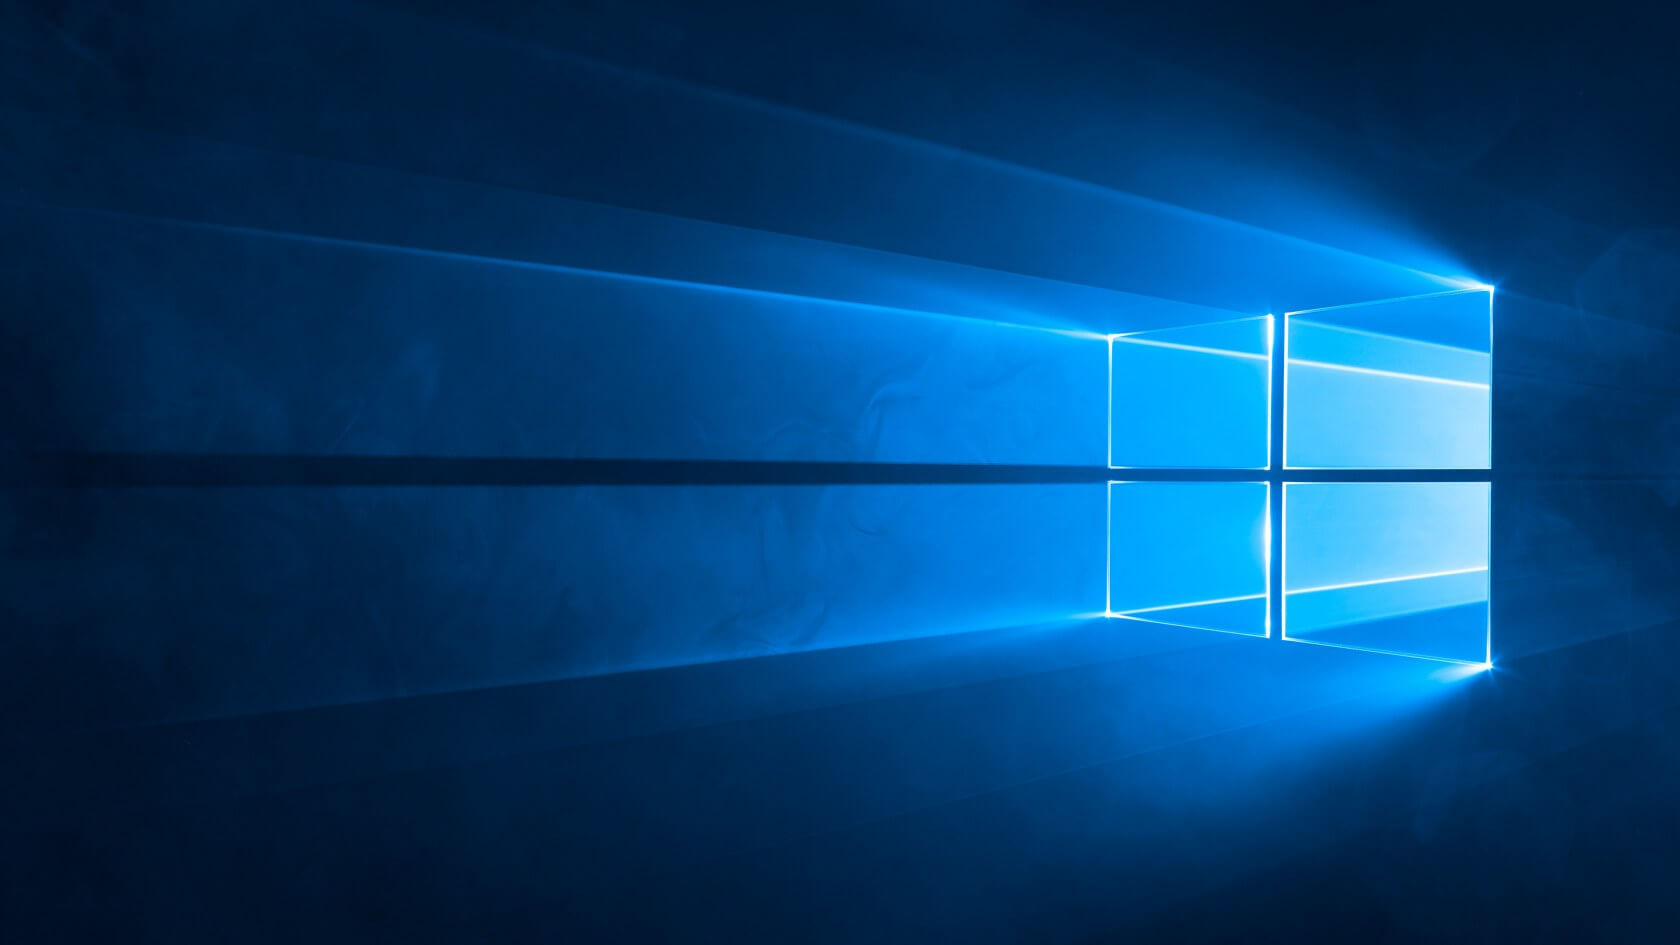 Could this be the new Windows 10 Start Menu that lacks Live Tiles?